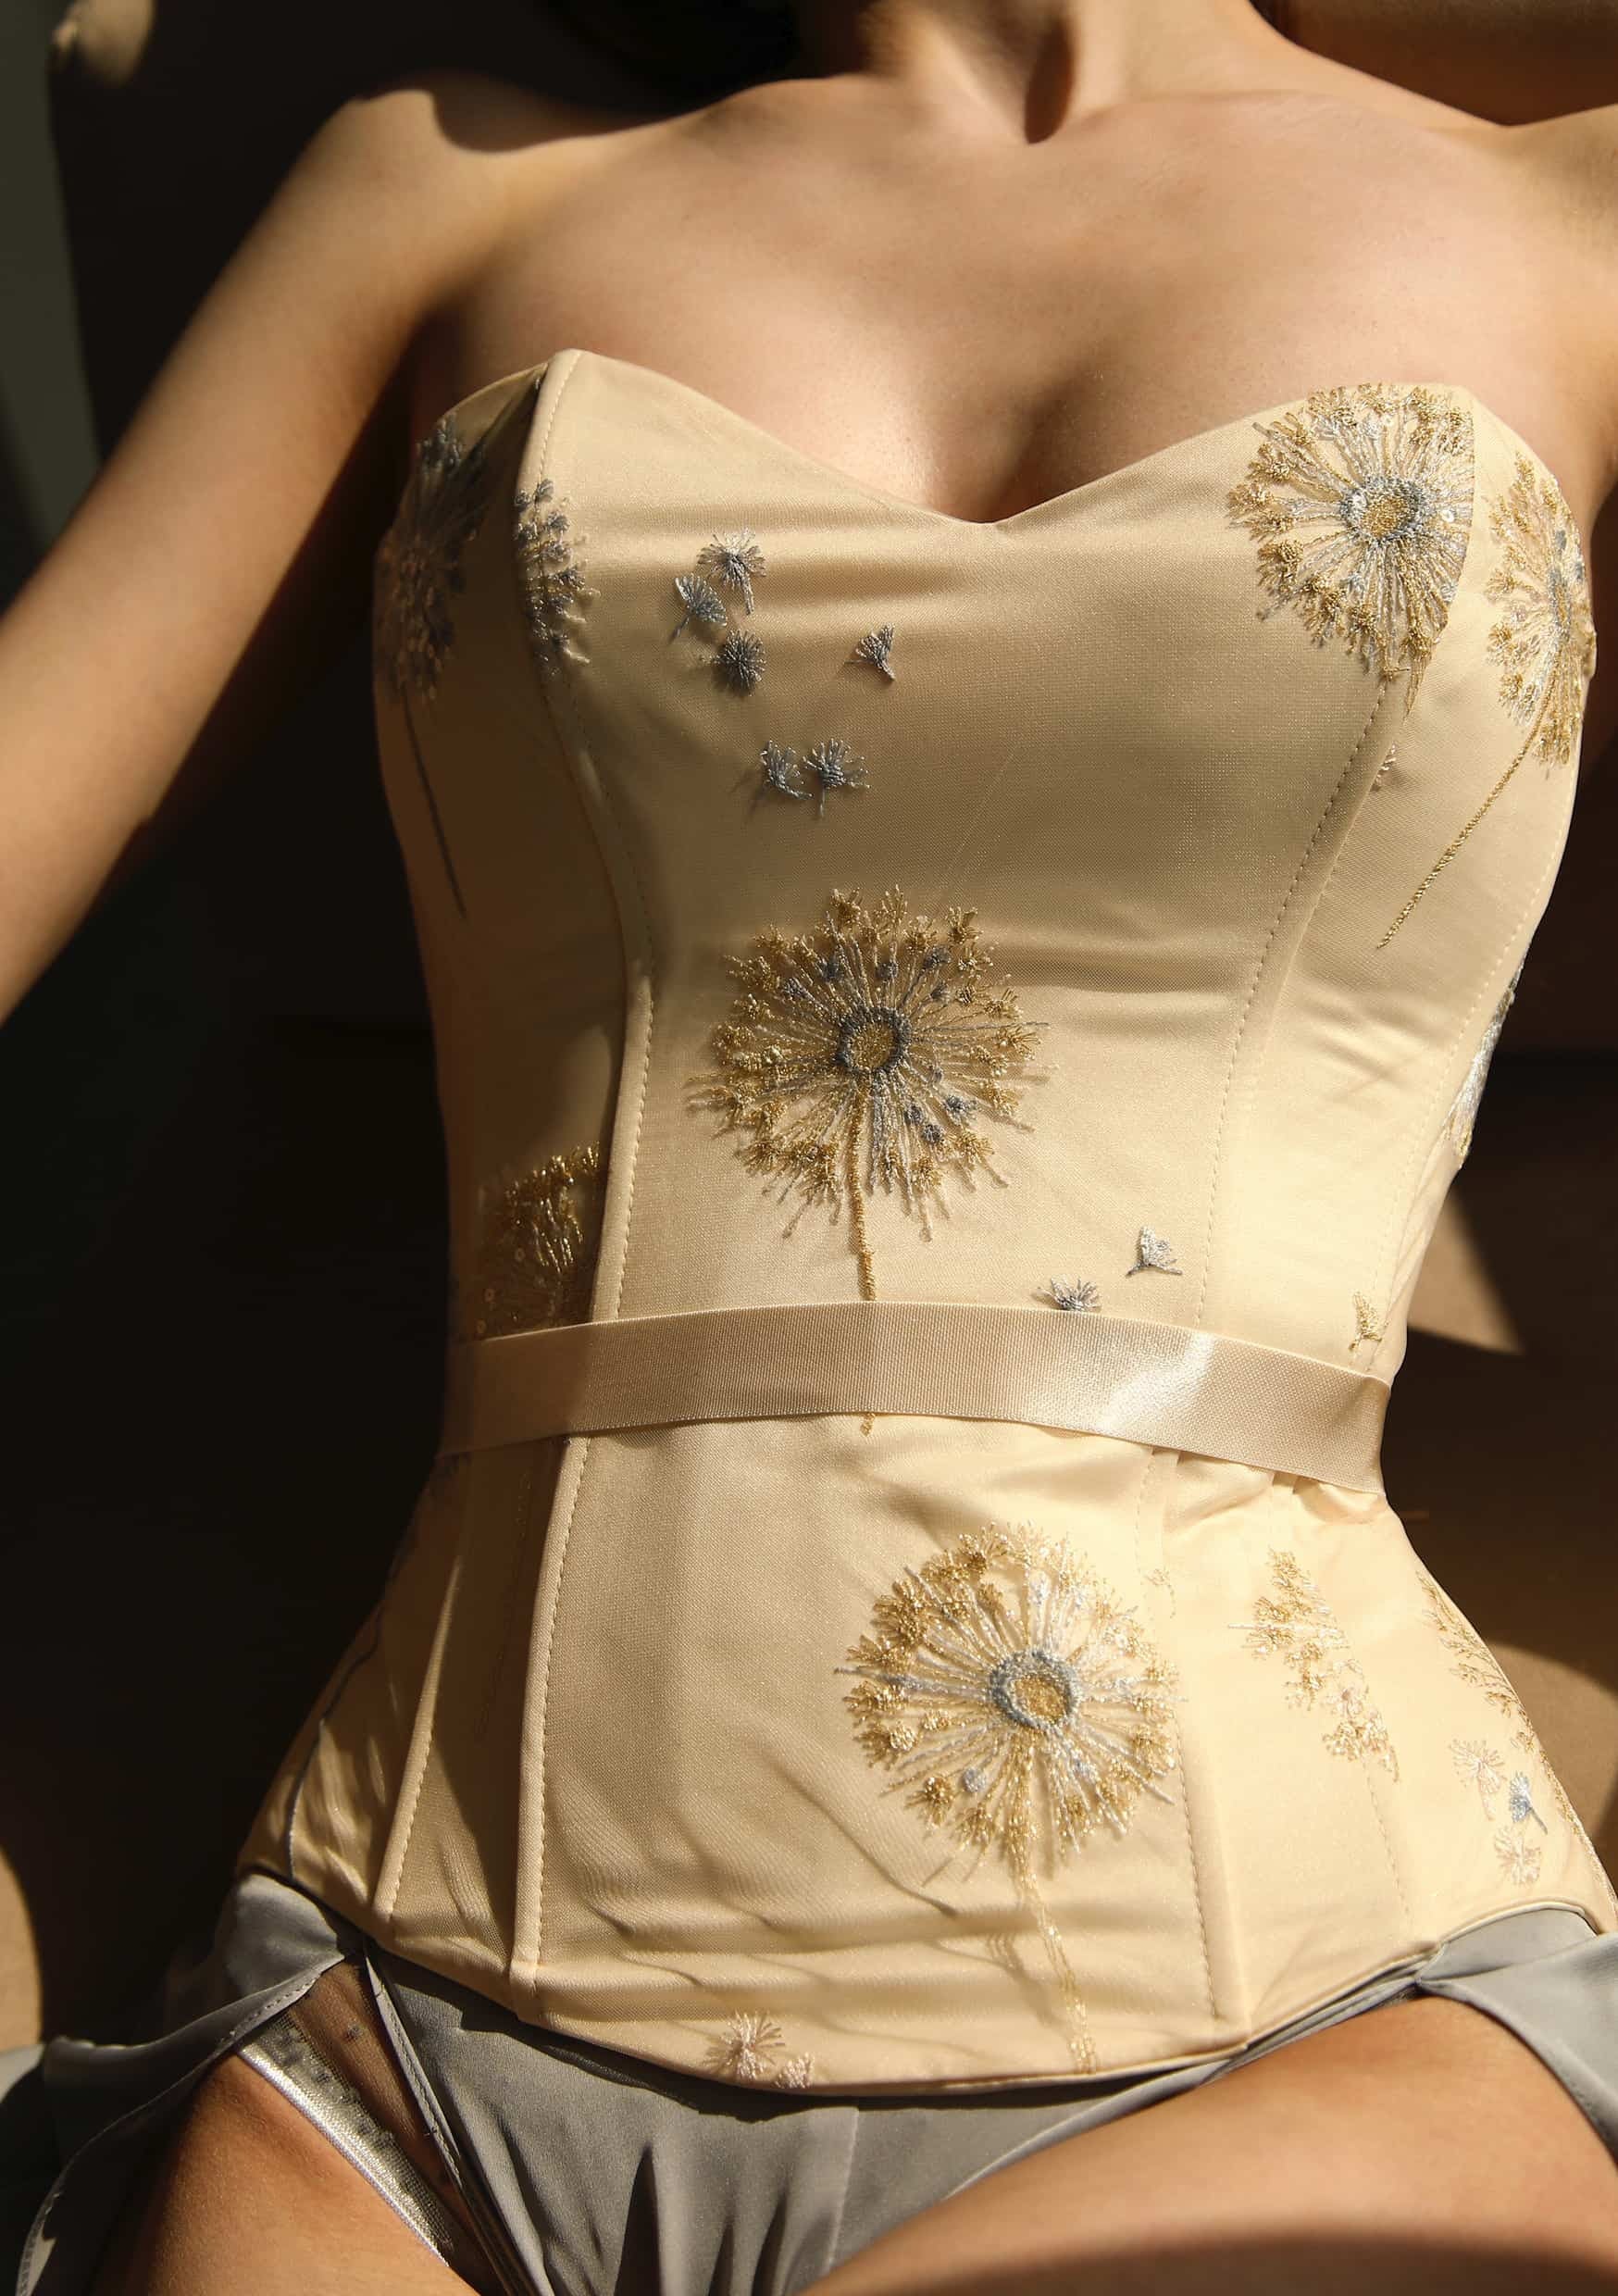 SUNLIGHT CORSET - Expect Lace